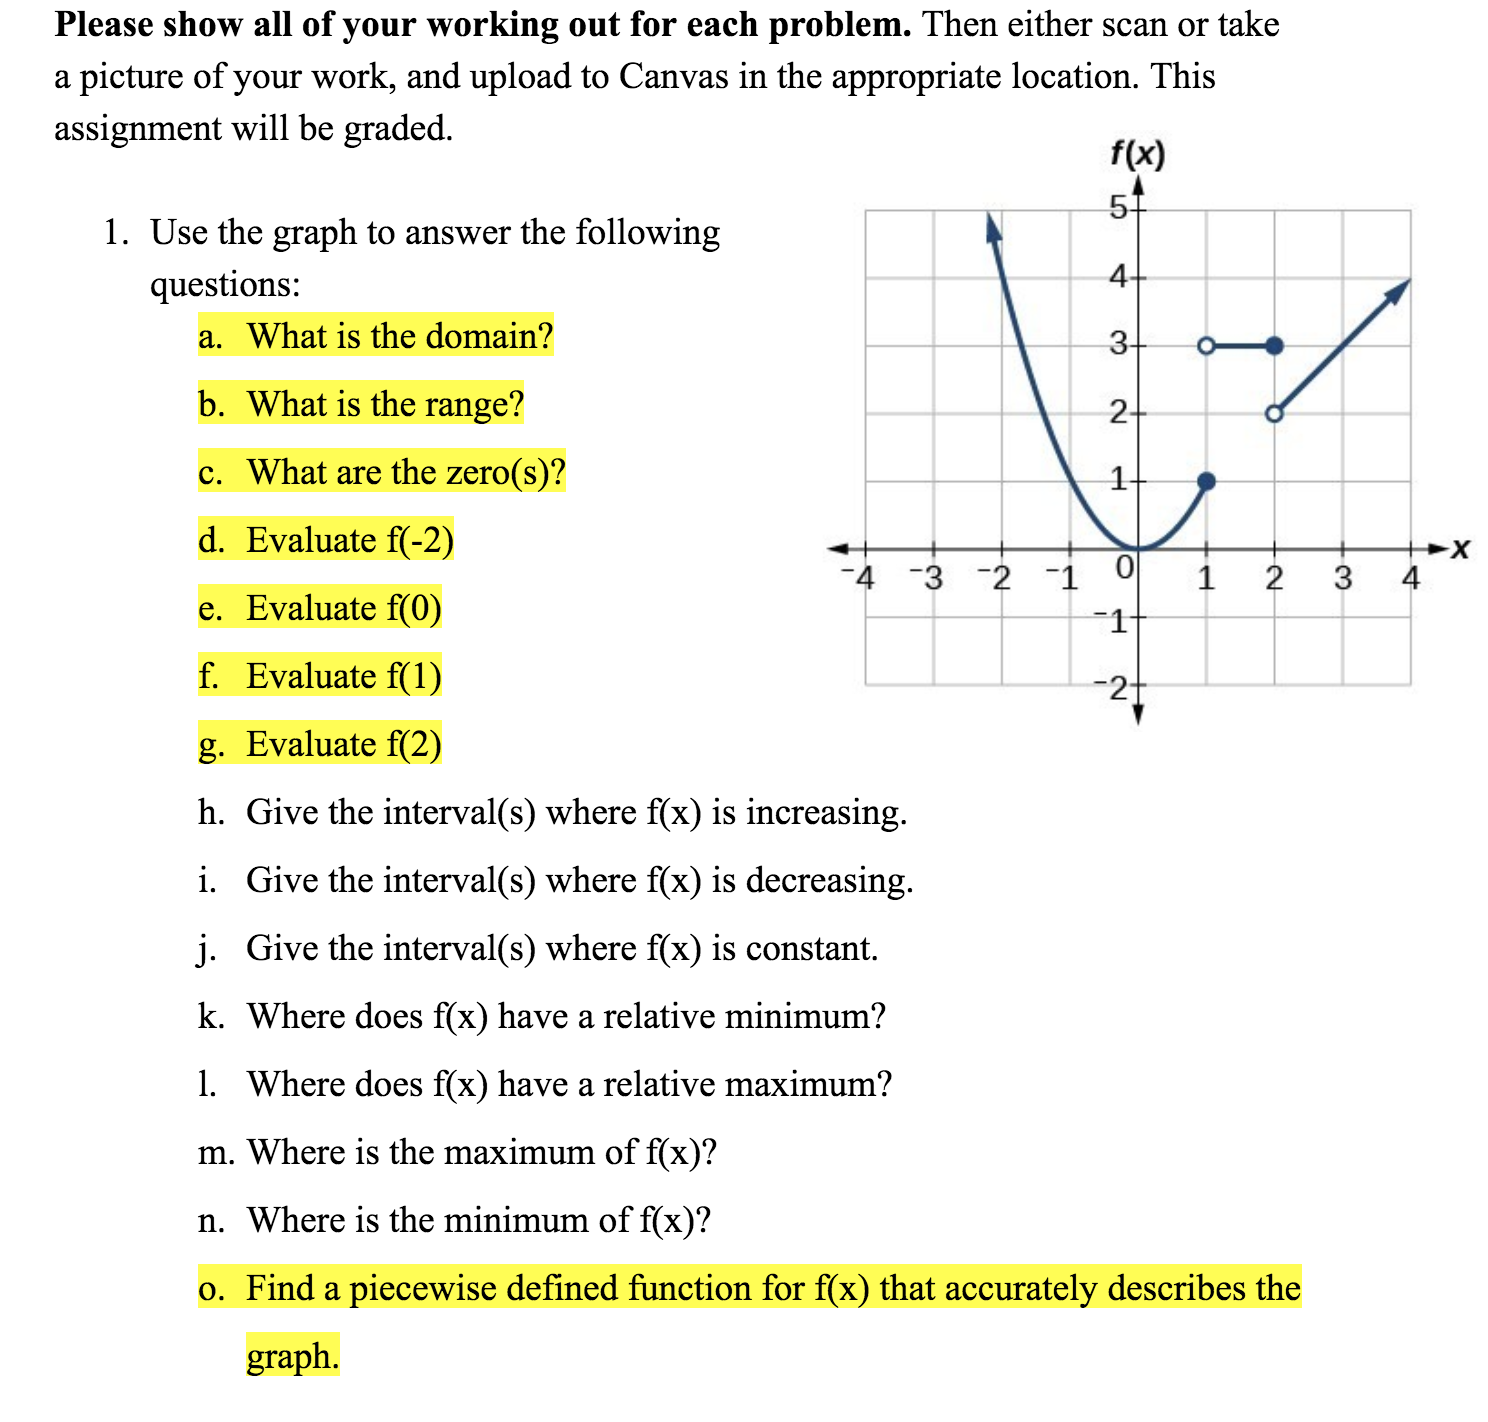 1. Use the graph to answer the following
questions:
4+
a. What is the domain?
b. What is the range?
2-
c. What are the zero(s)?
d. Evaluate f(-2)
1 2
-1
-4 -3 -2 -1
3
4
e. Evaluate f(0)
5.
3.
